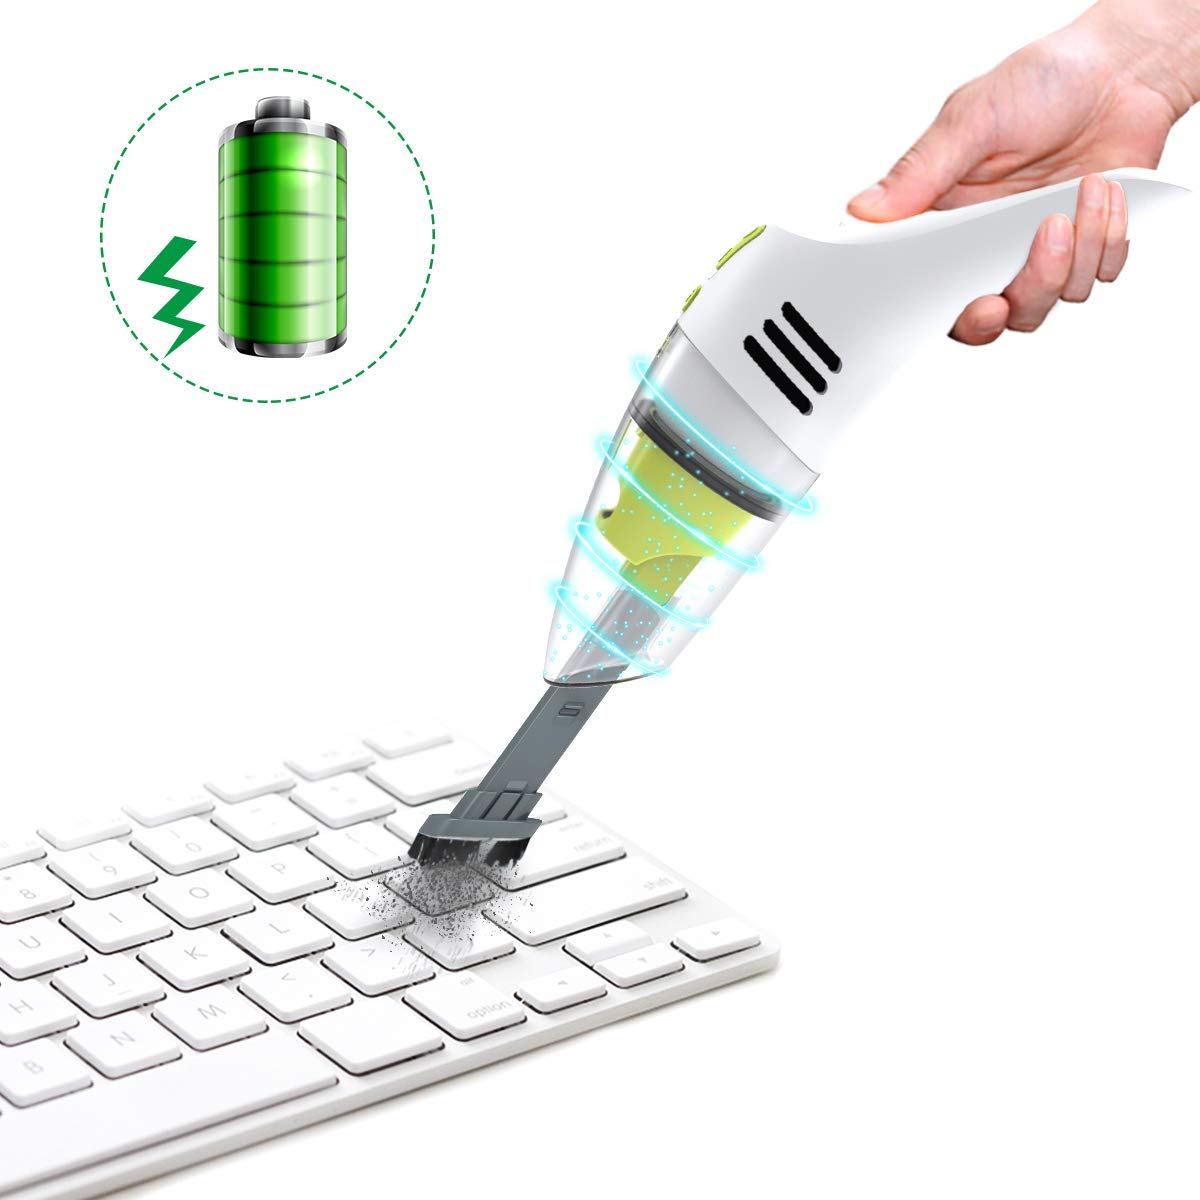 MECO-Keyboard-Cleaner-Rechargeable-Mini-Vacuum-Wet-Dry-Cordless-Desktop-Vacuum-Cleaner-for-Cleaning--1795359-1